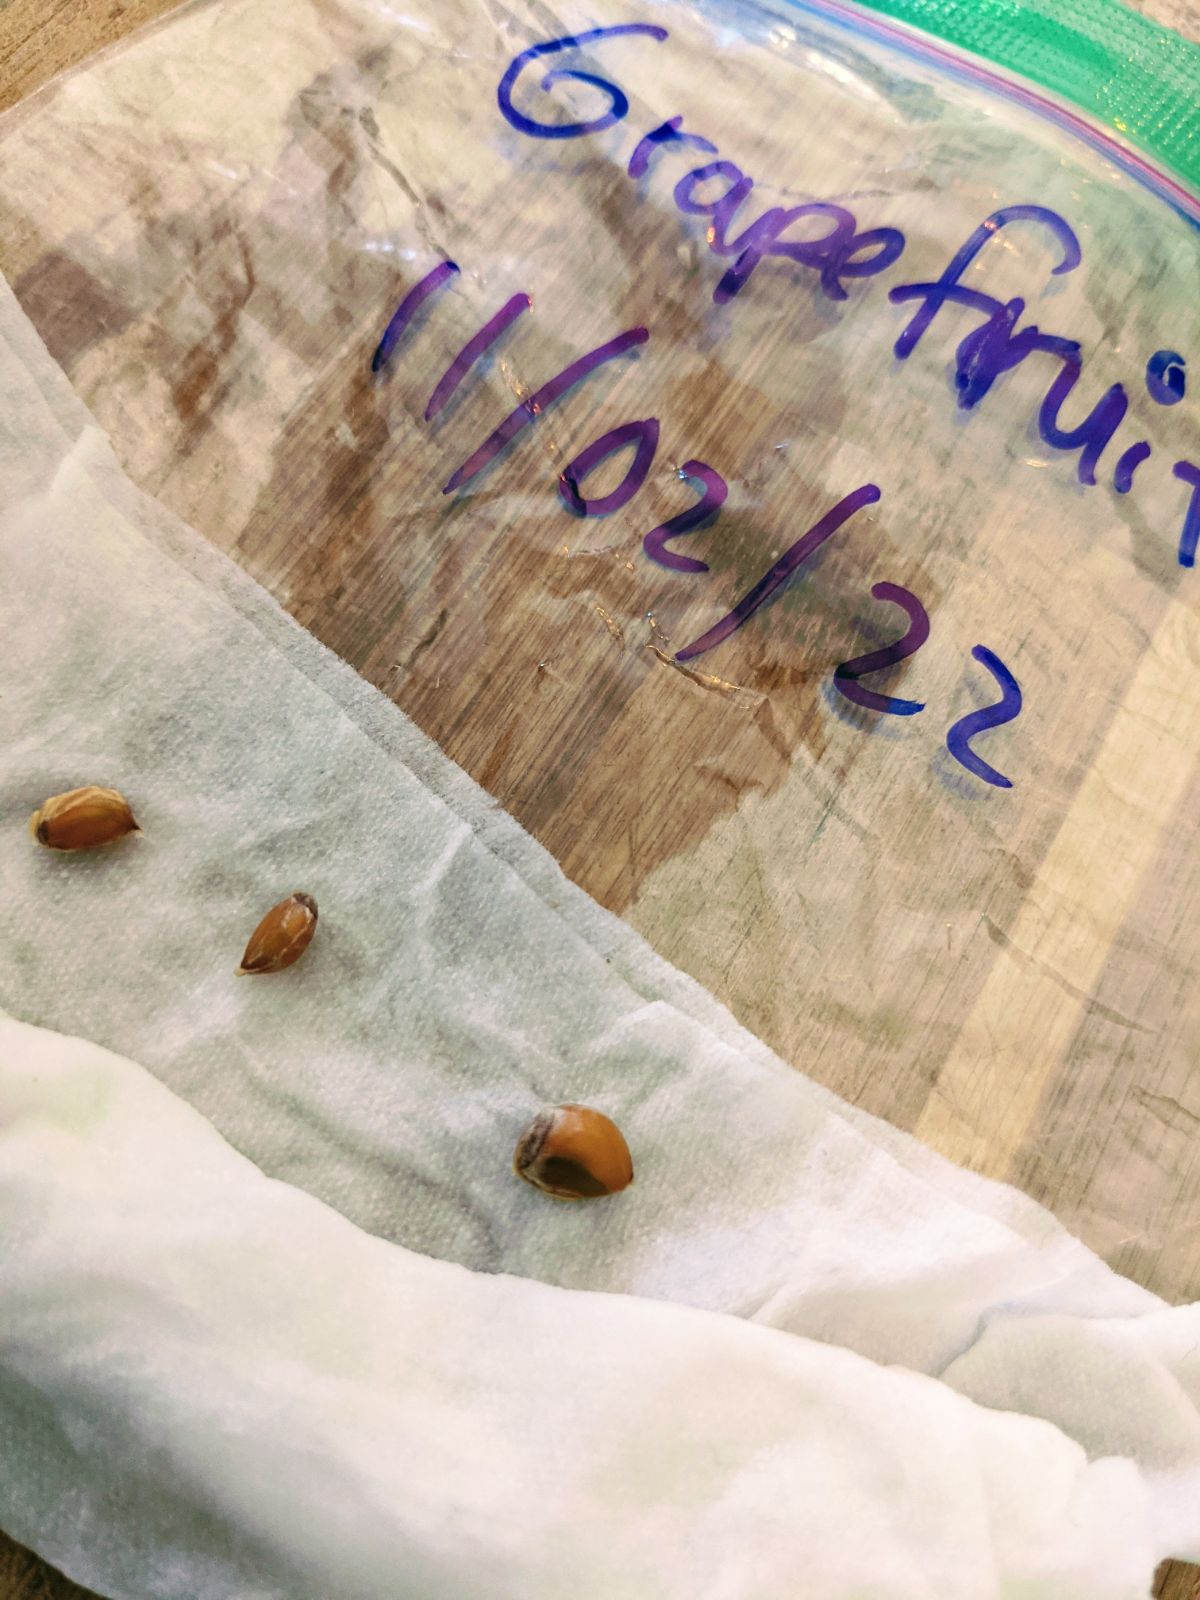 Germinating grapefruit seeds in a plastic baggie with wet paper towels